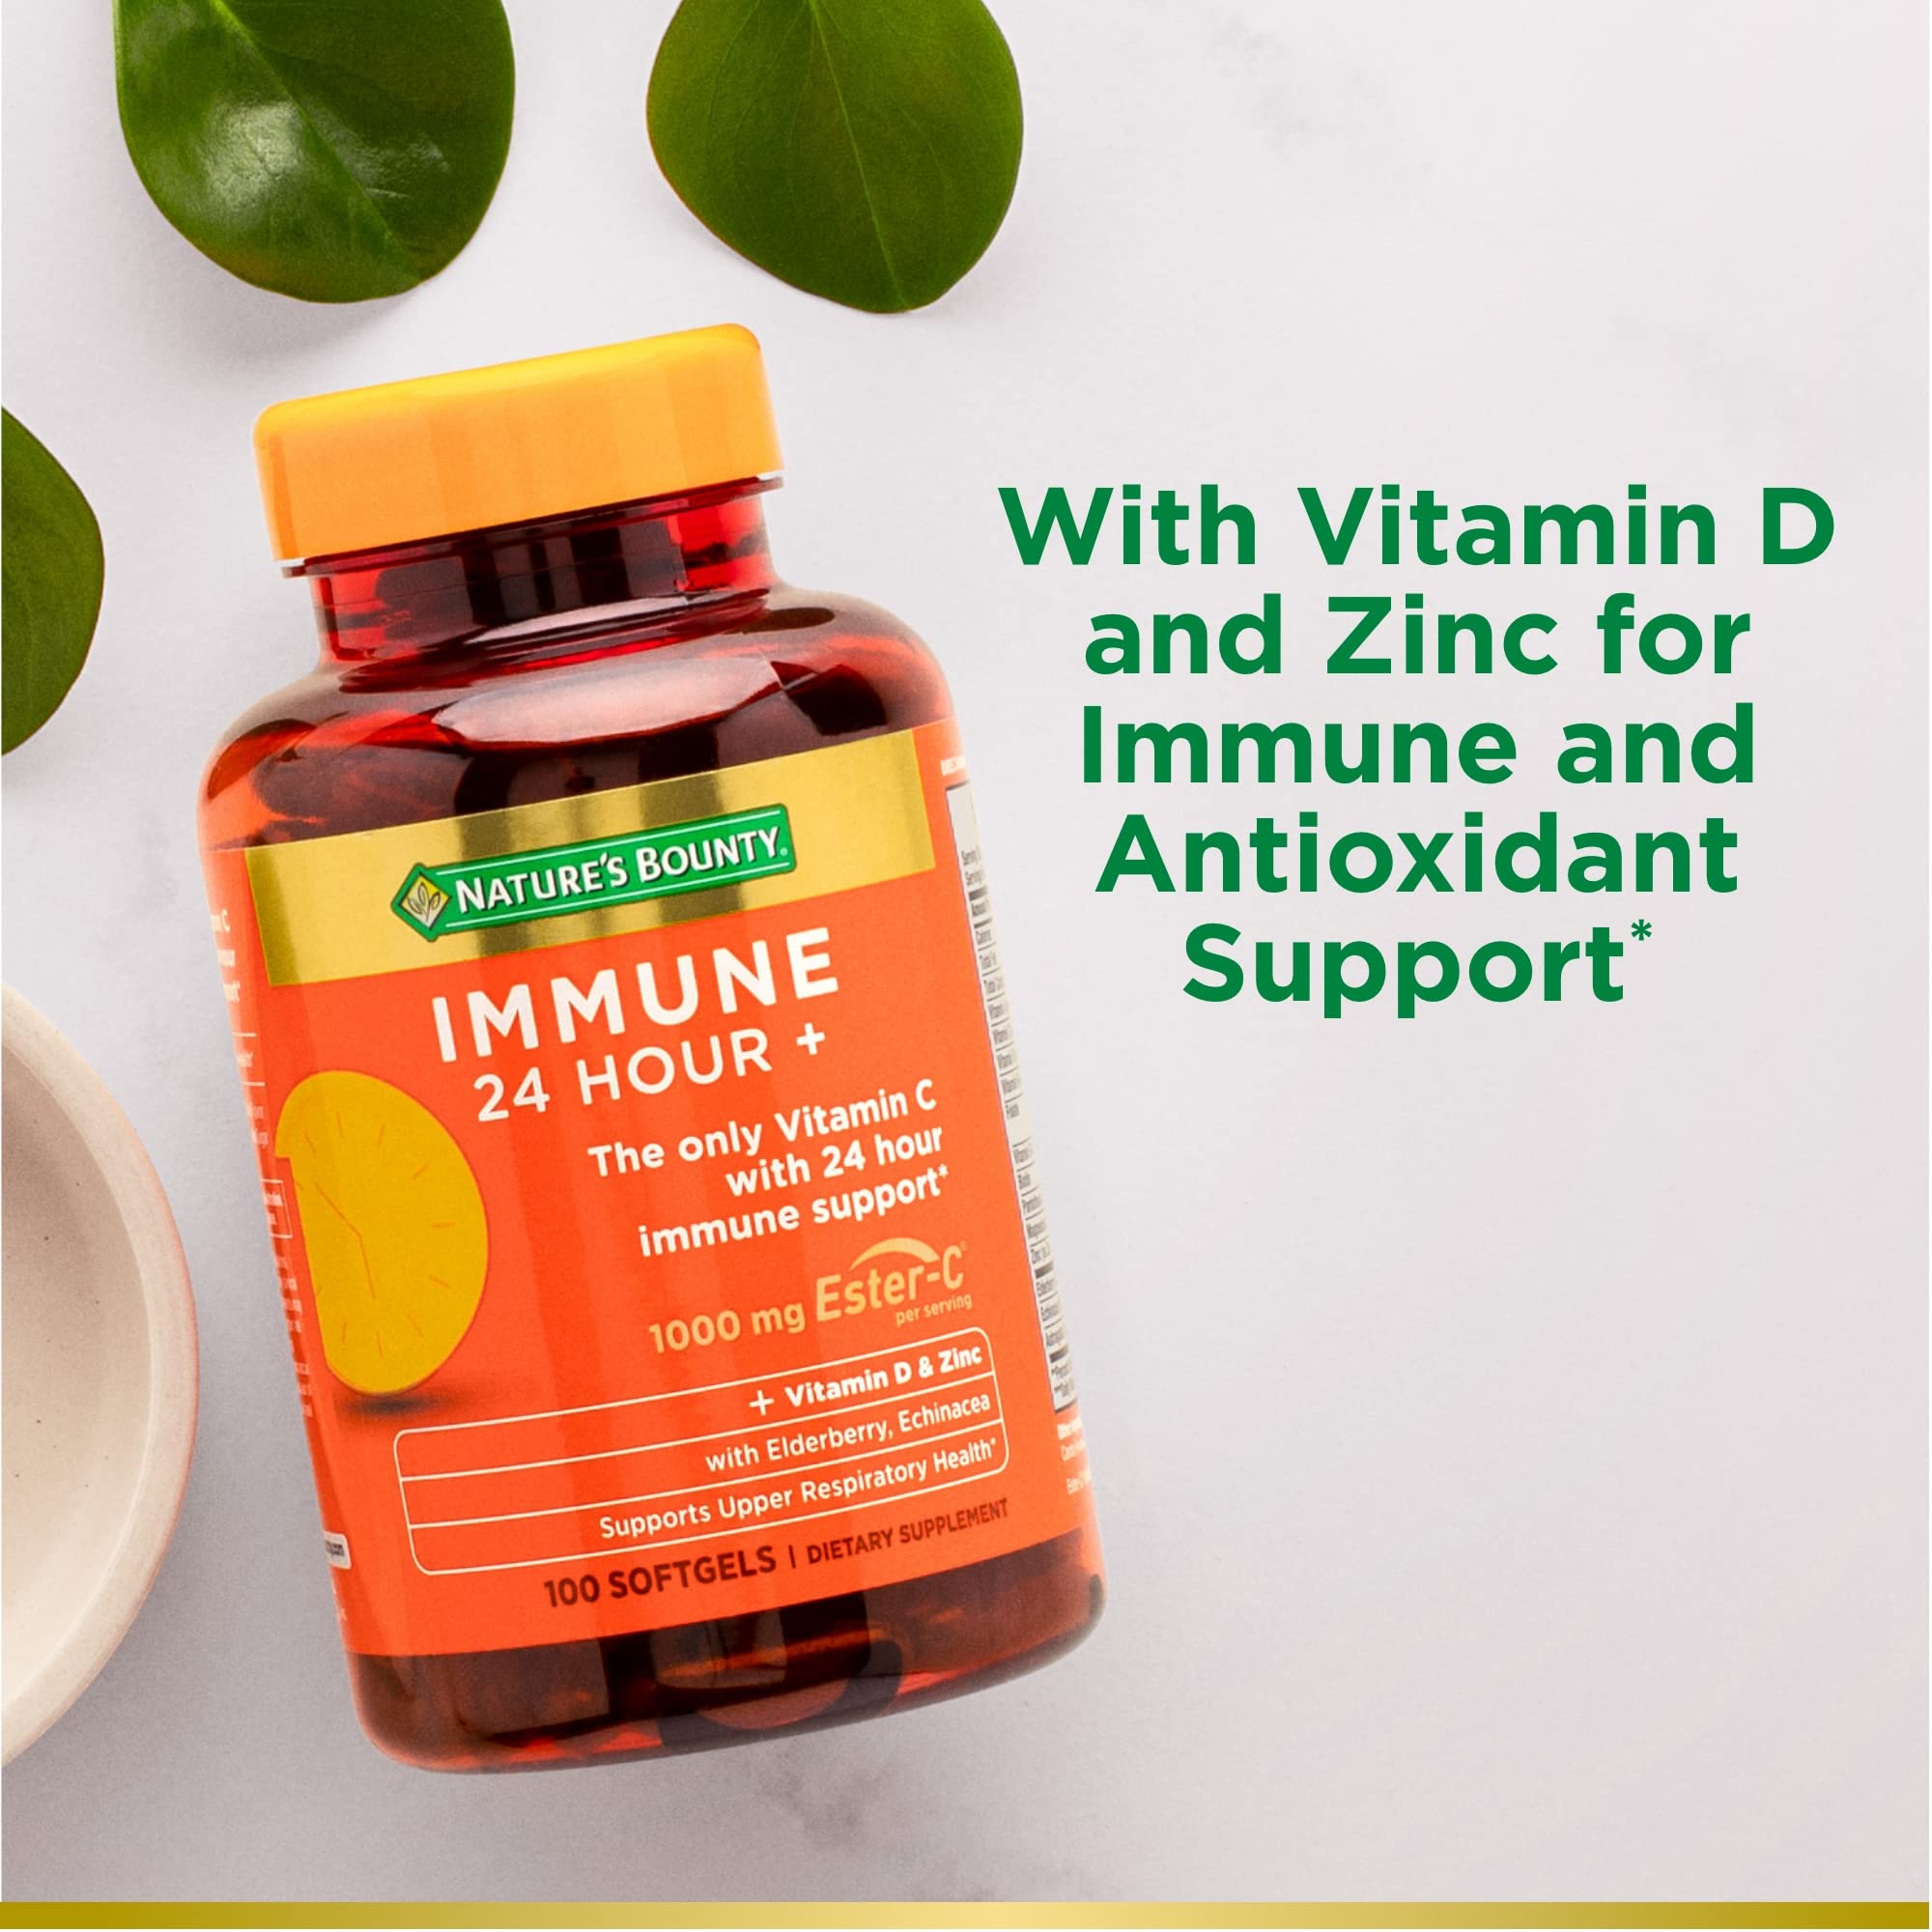 Nature’s Bounty Vitamin C 24 Hour Immune Support with Zinc and Vitamin D, Daily Immune and Upper Respiratory Support, Ester Vitamin C 1000mg Capsules (Softgels), 100 Count